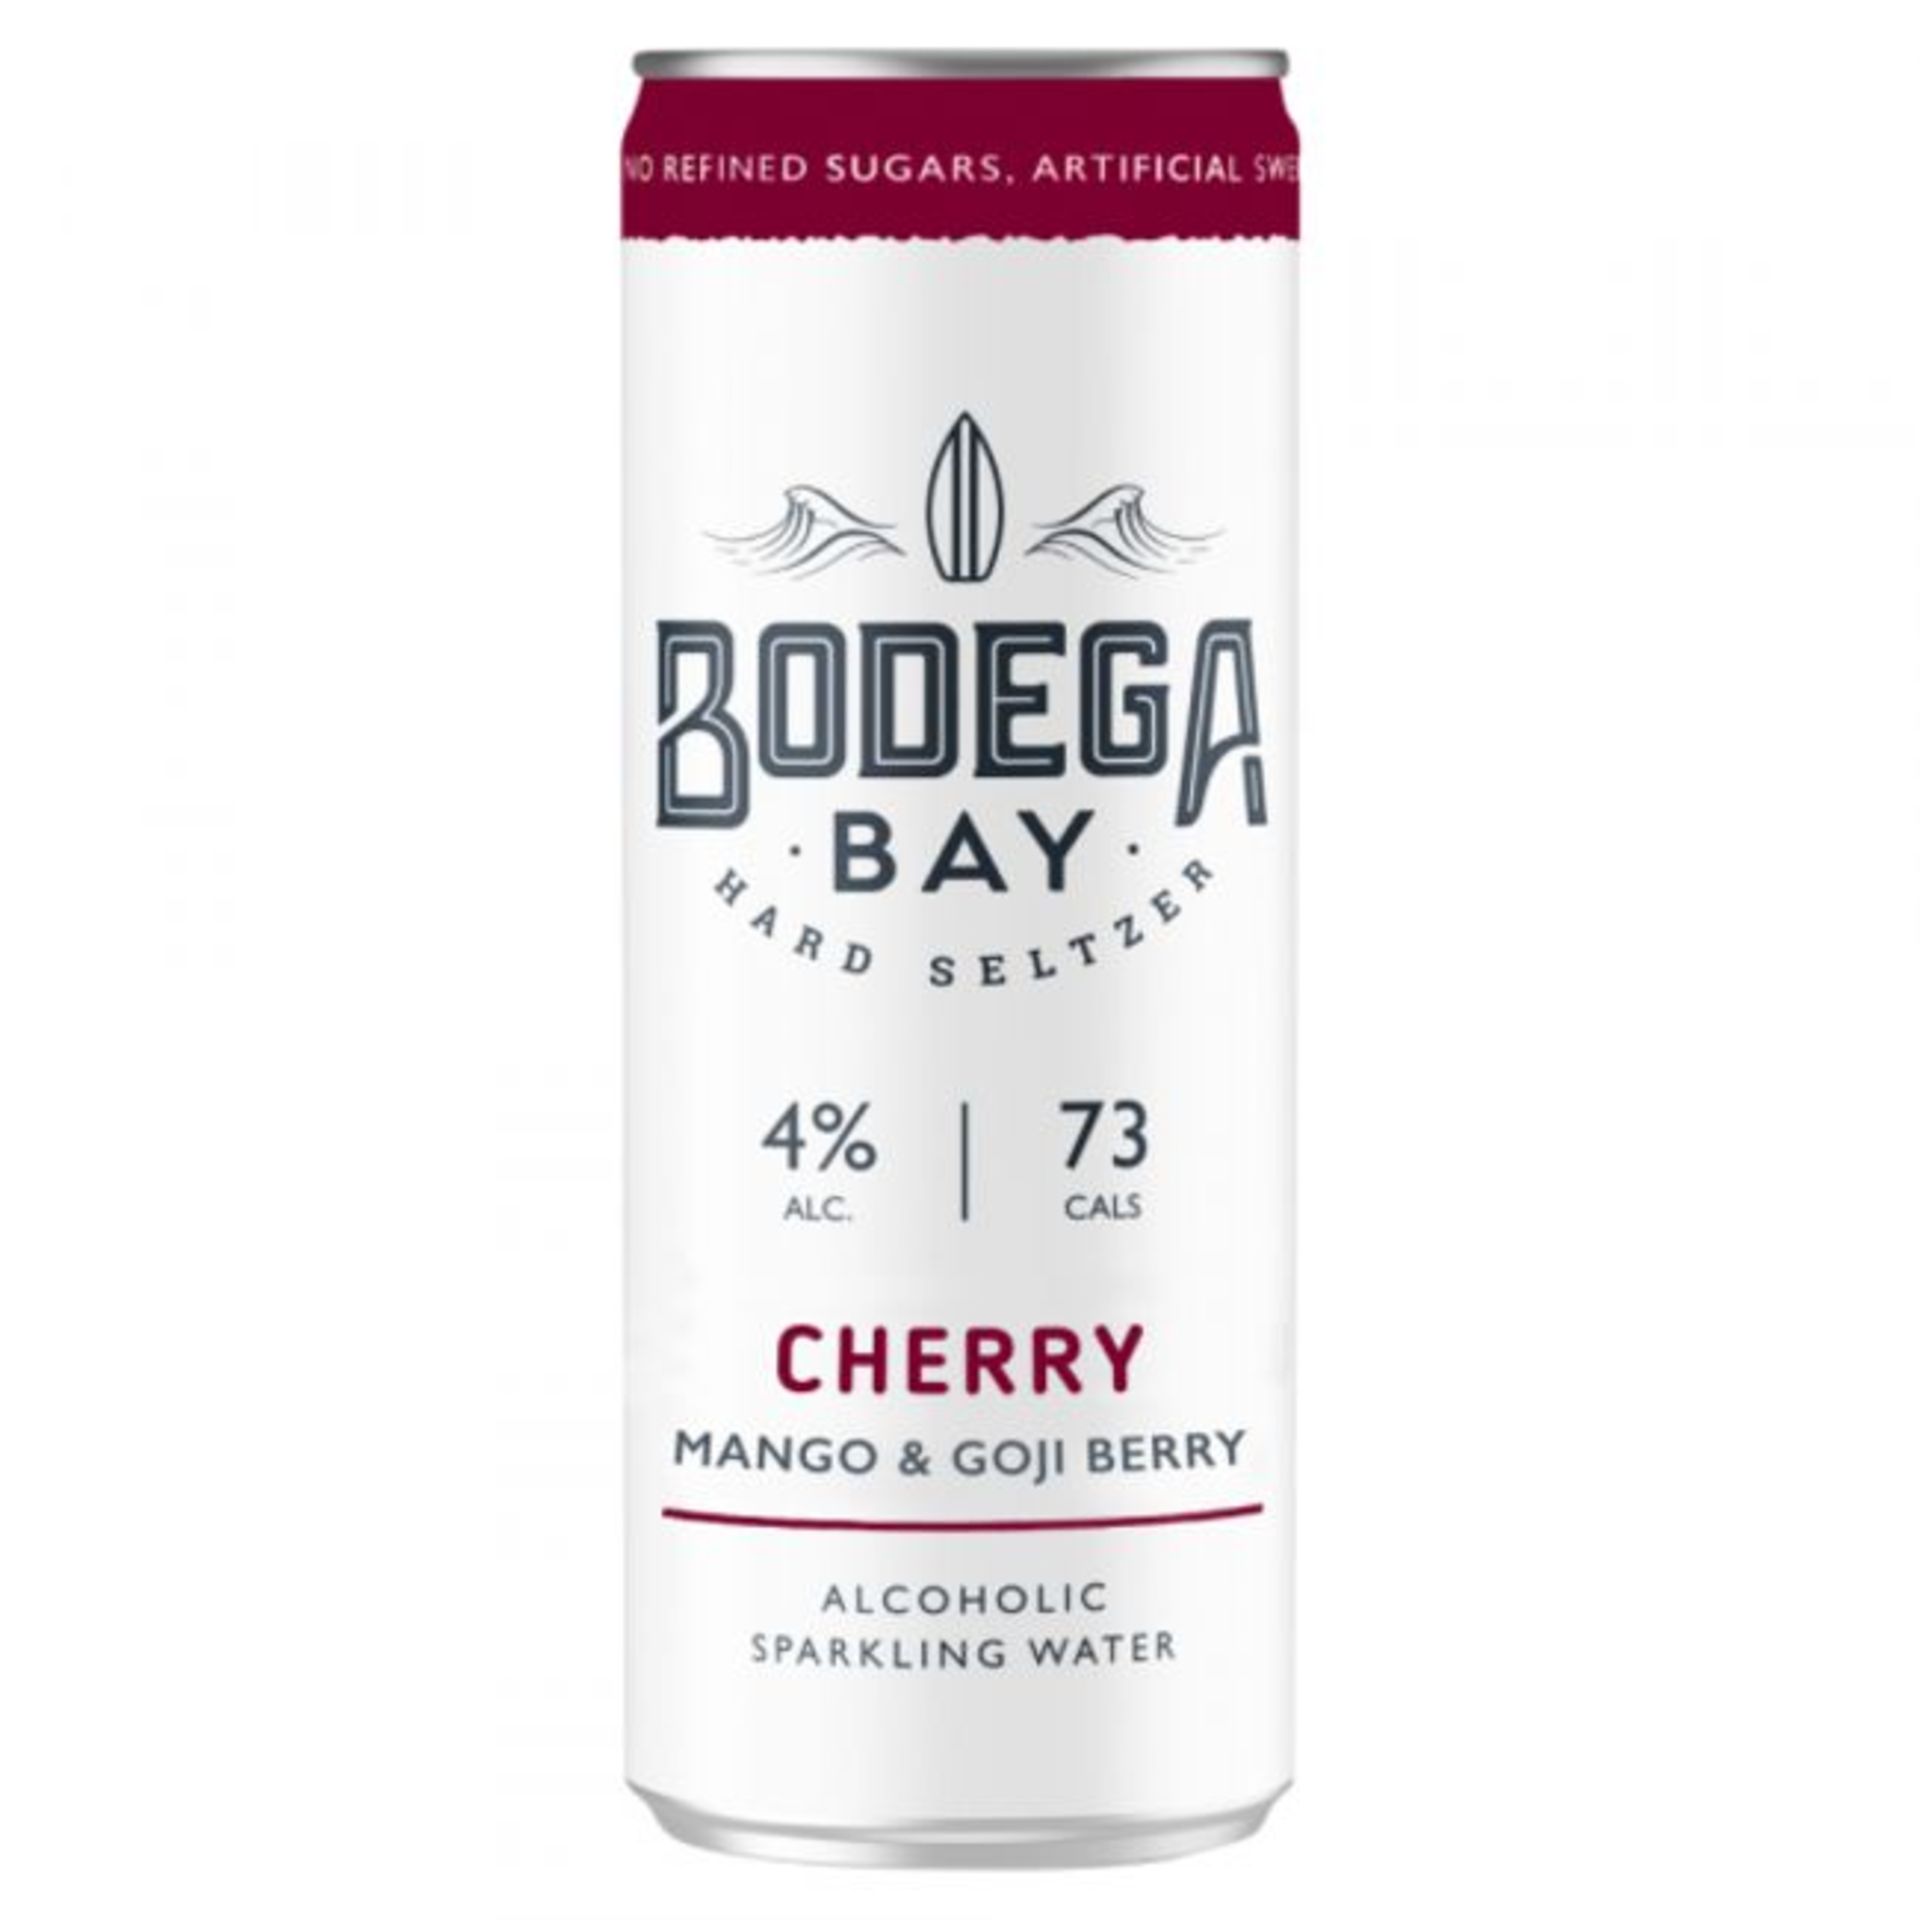 1,080 x Cans of Bodega Bay Hard Seltzer 250ml Alcoholic Sparkling Water Drinks - RESALE JOB LOT - - Image 12 of 21